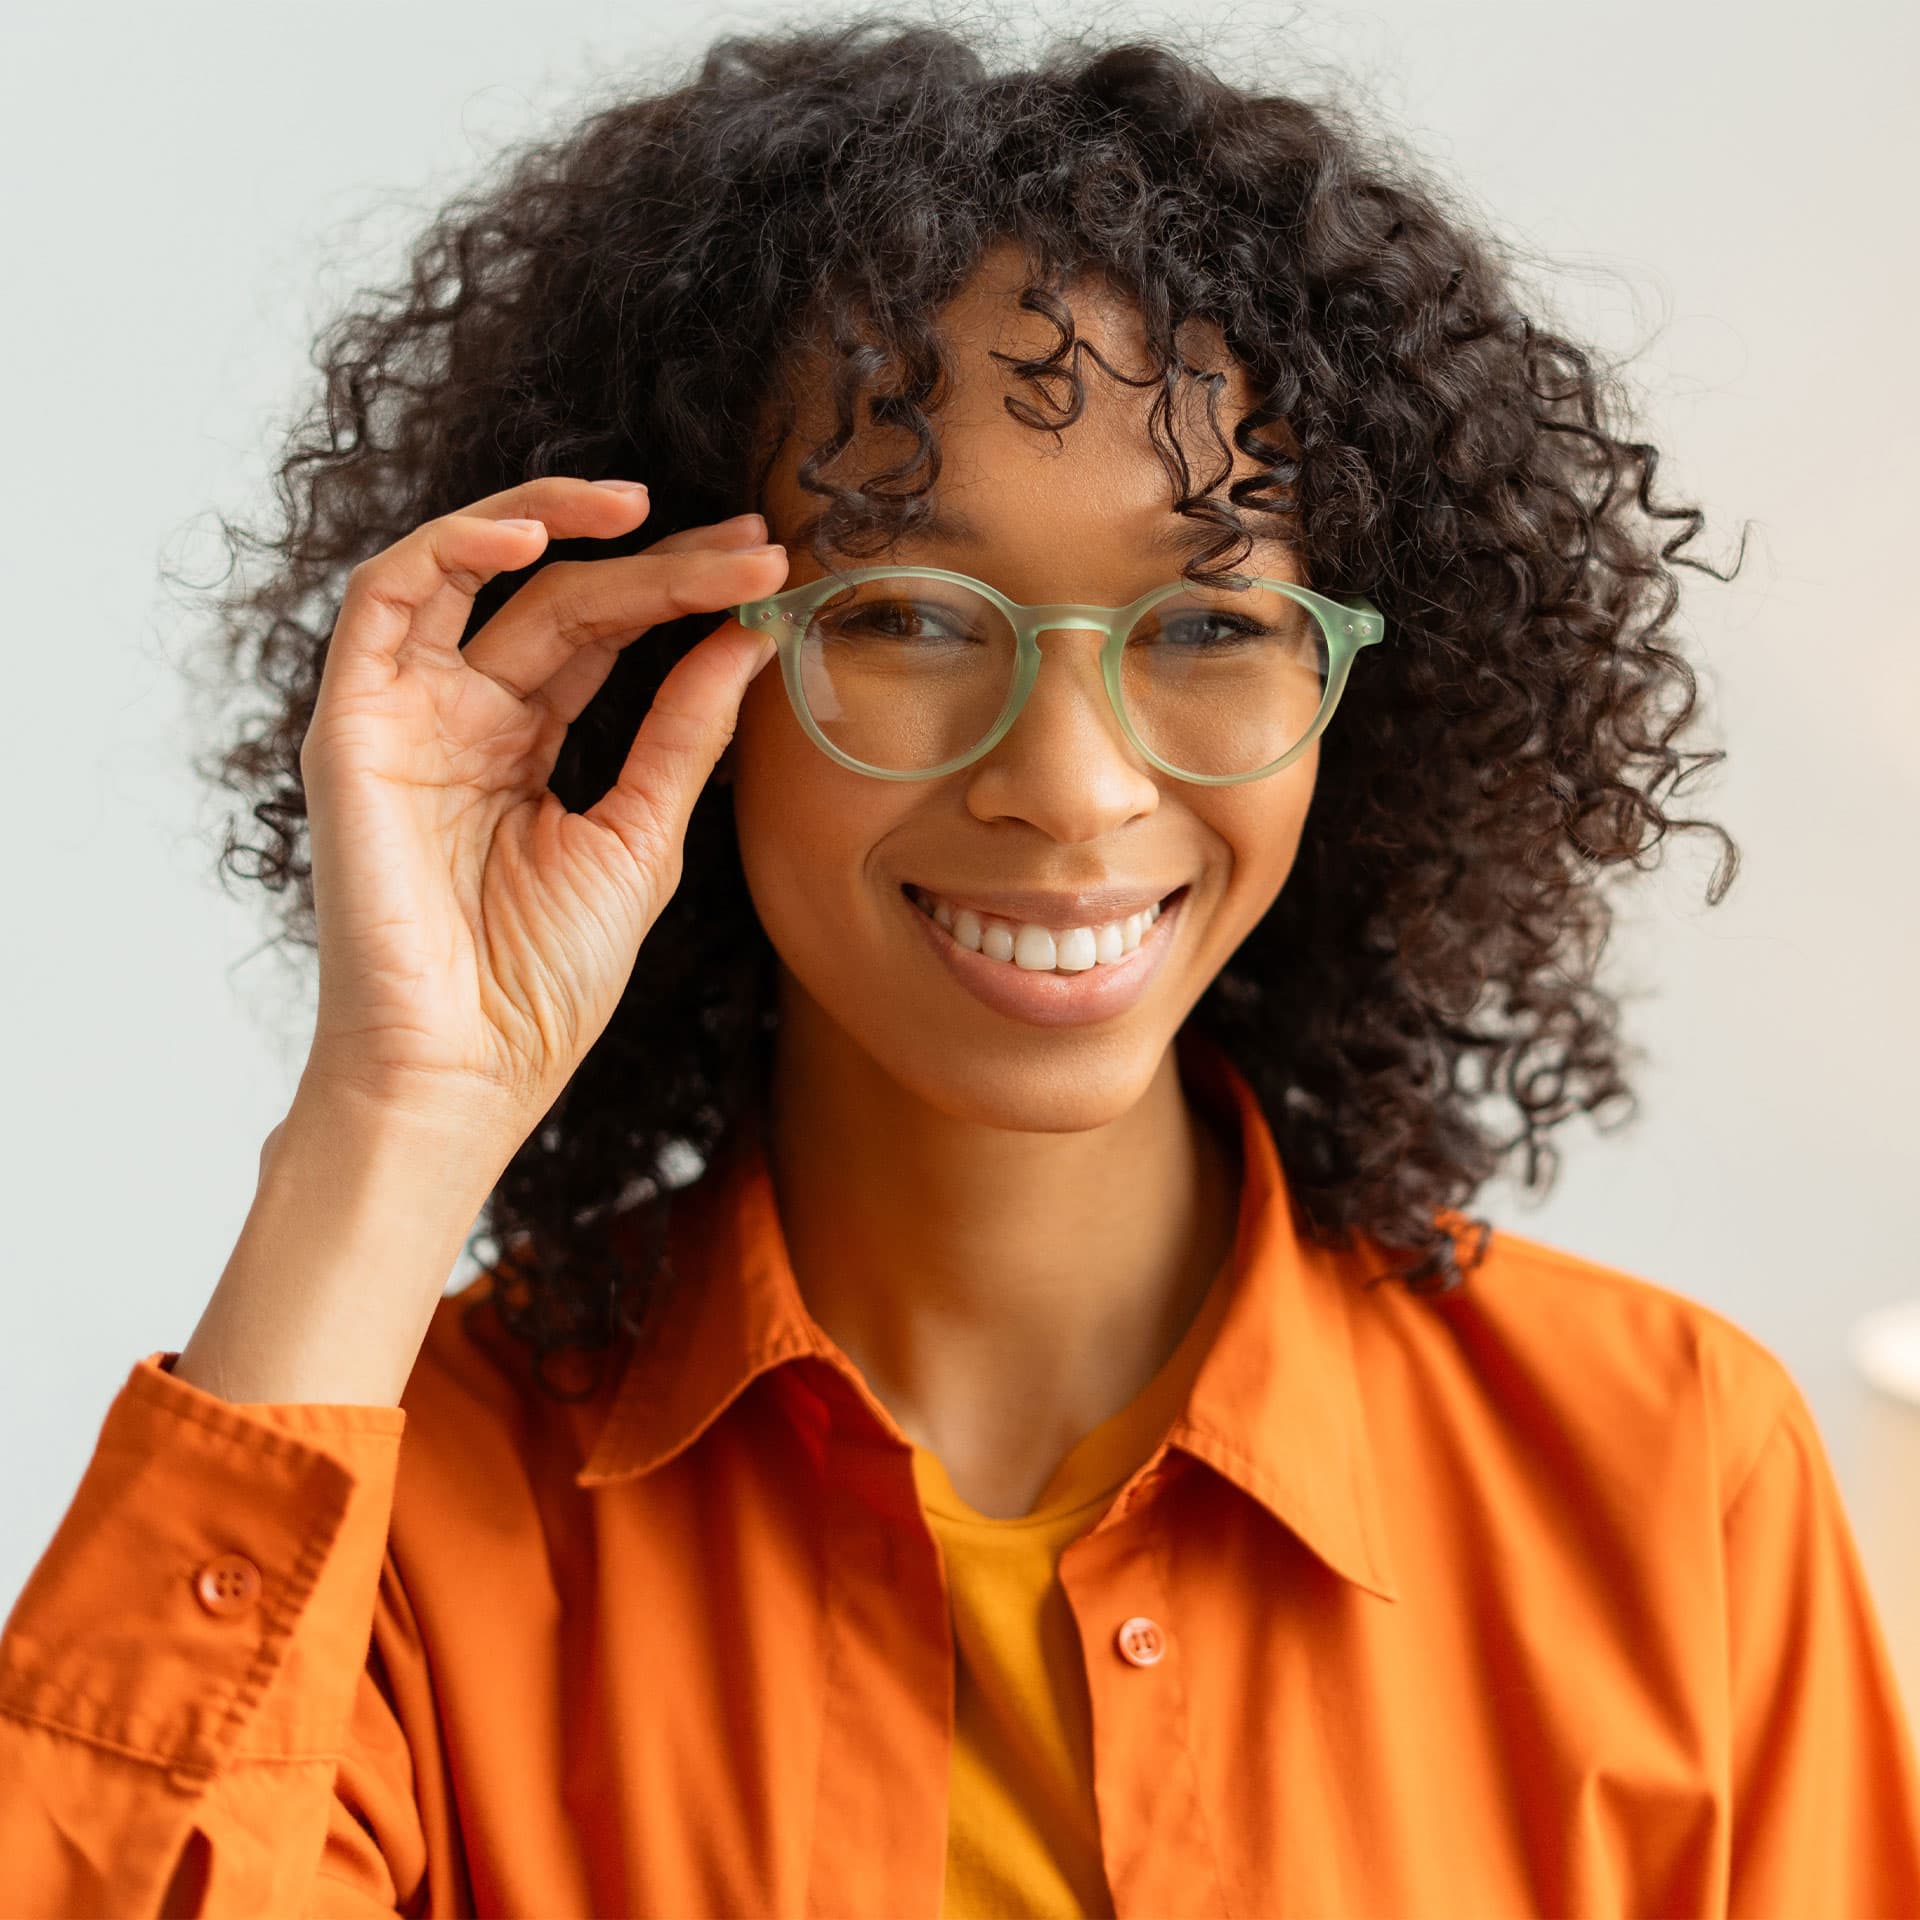 A woman holding her glasses and smiling.